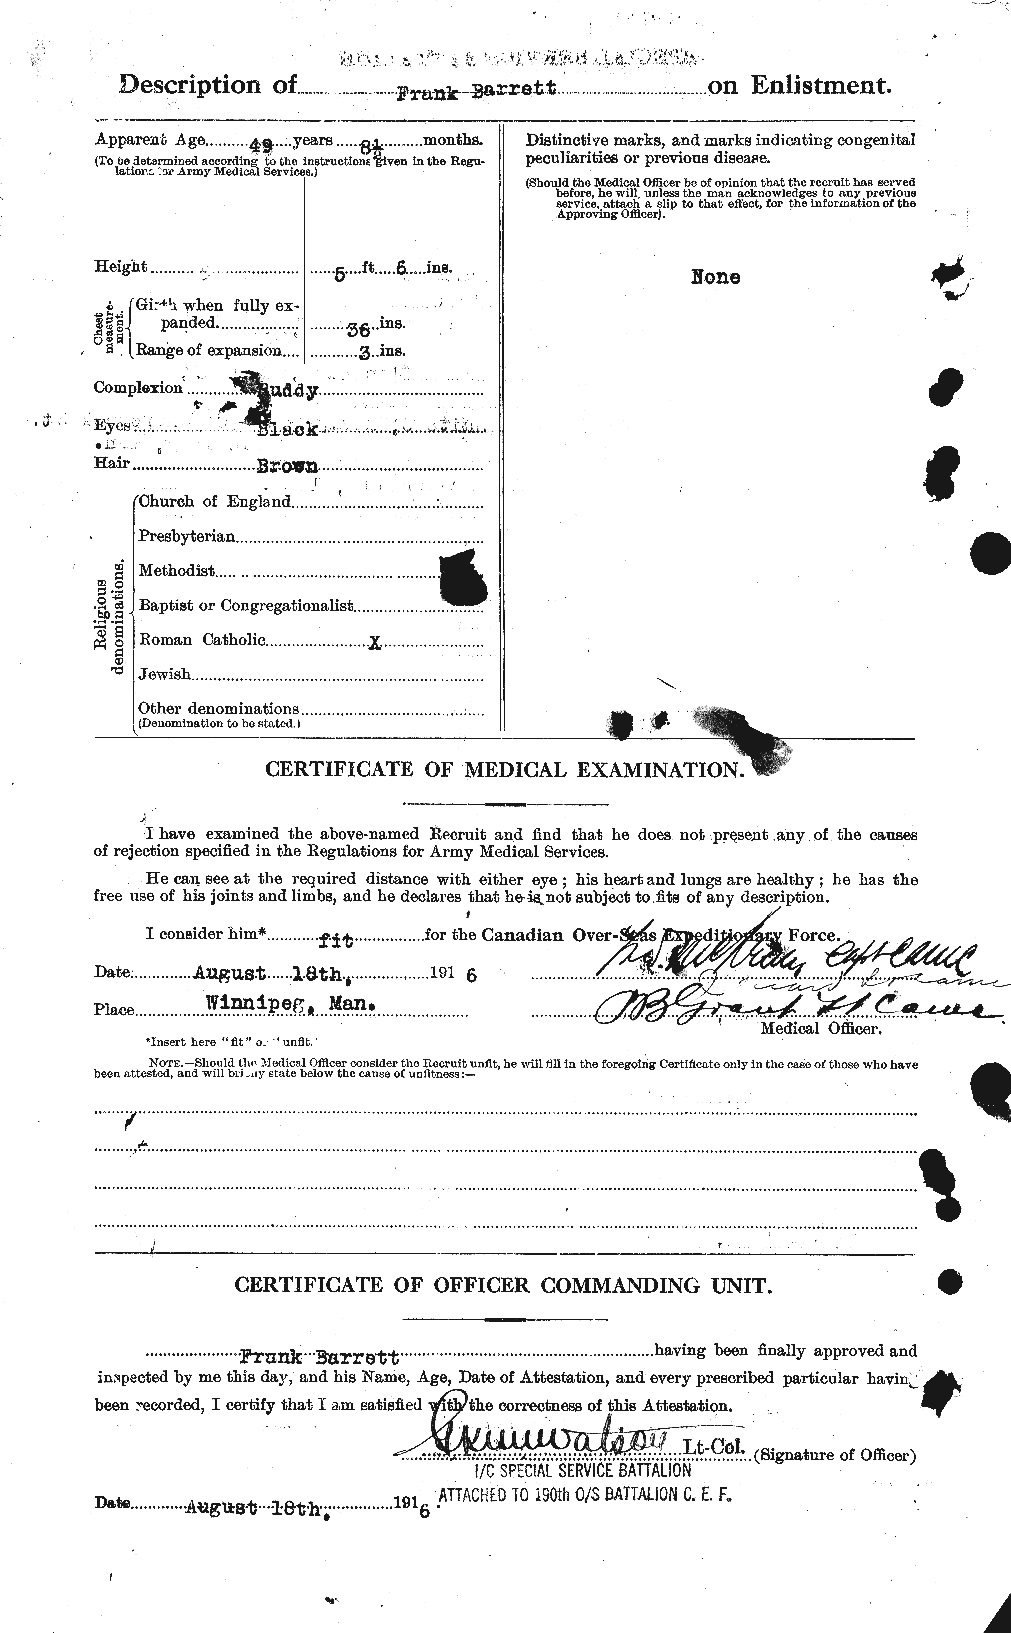 Personnel Records of the First World War - CEF 220341b